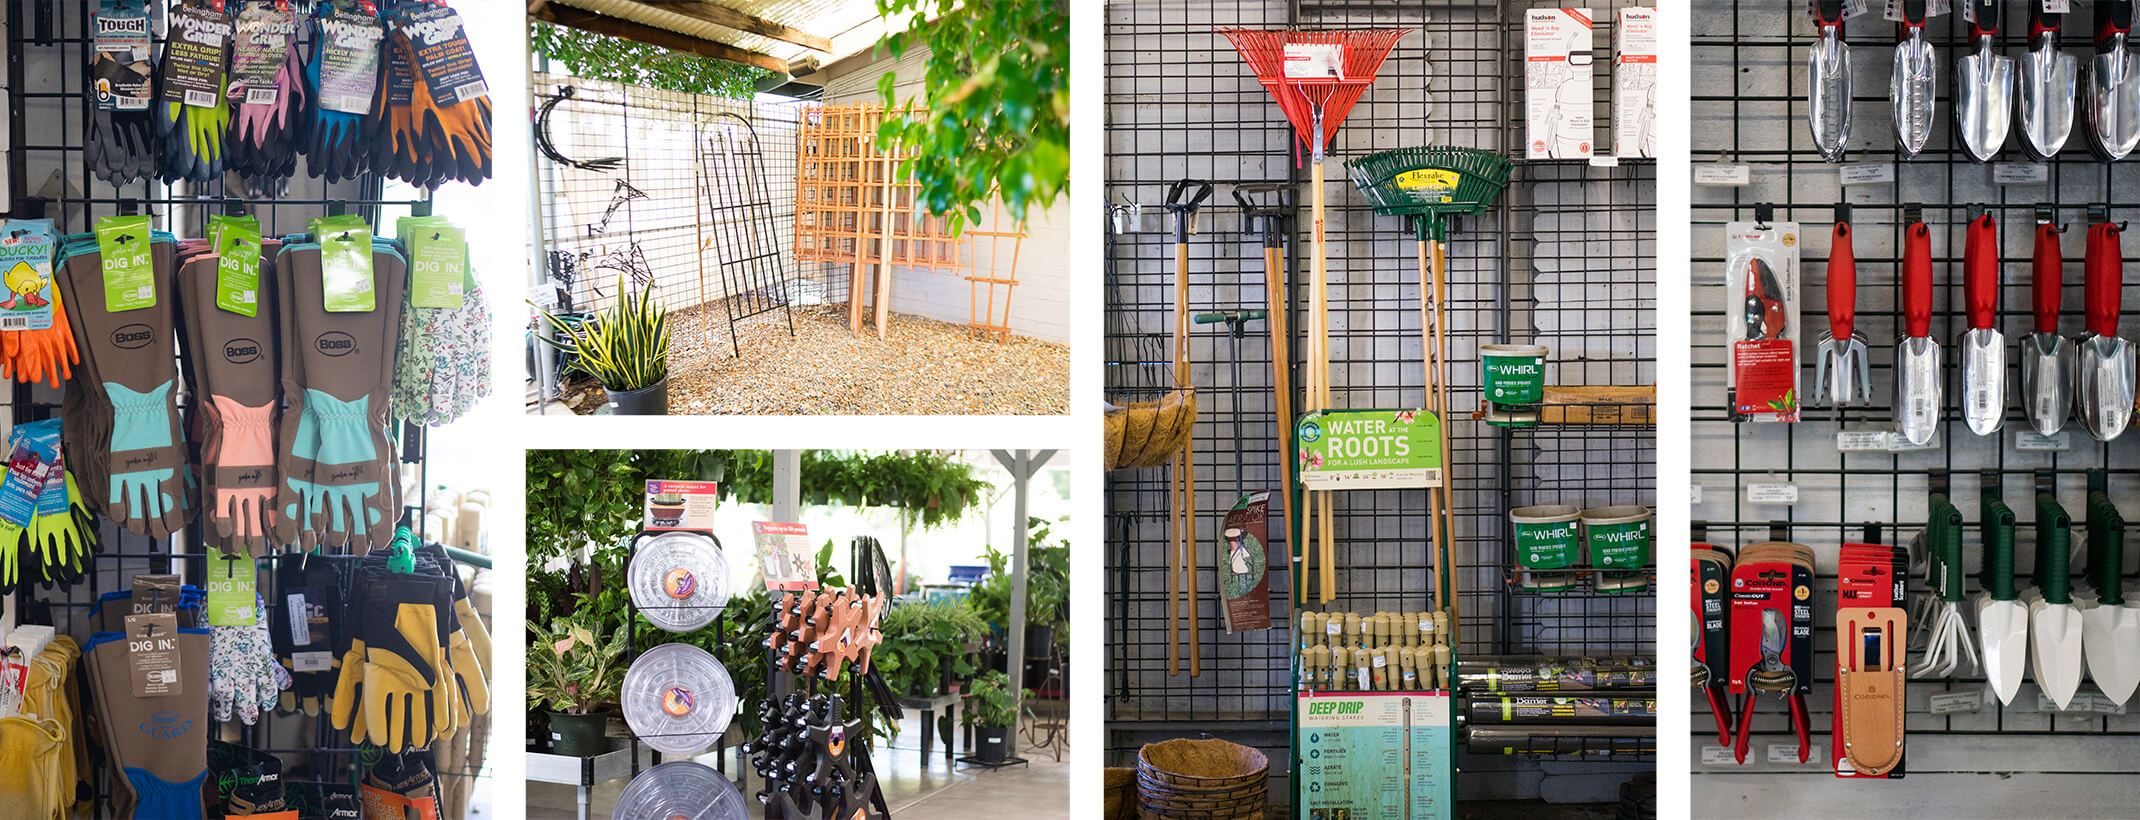 A collage of 5 images - A variety of garden gloves on display, garden trellises and hooks, plant saucers and rolling planter stand near houseplants, a variety of large garden tools on display, and a variety of garden hand tools on display